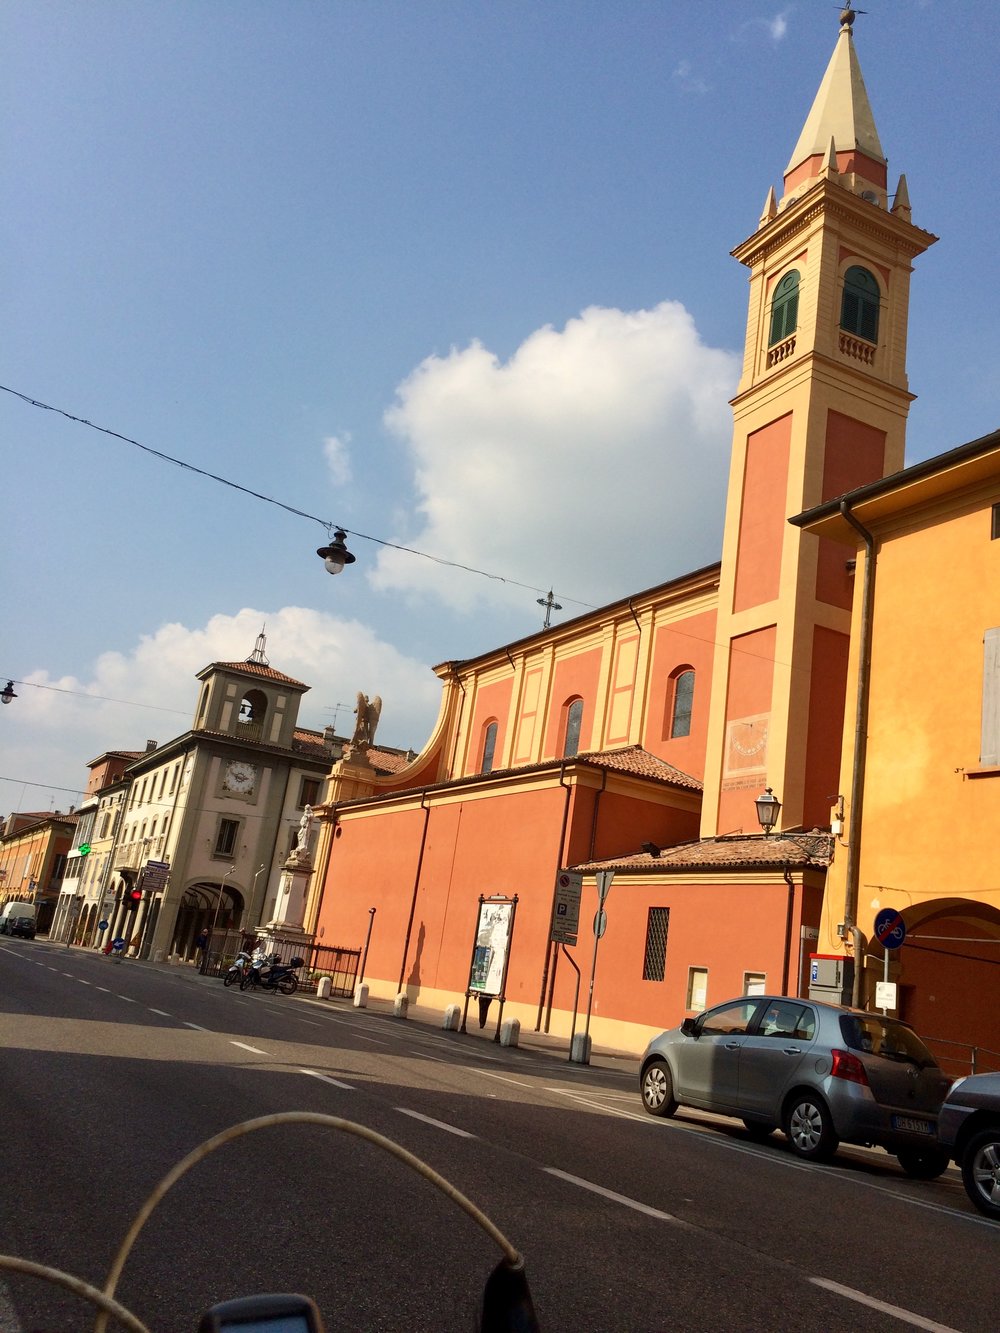 Pretty town of Castelfranco Emilia- forced the GPS to go this way